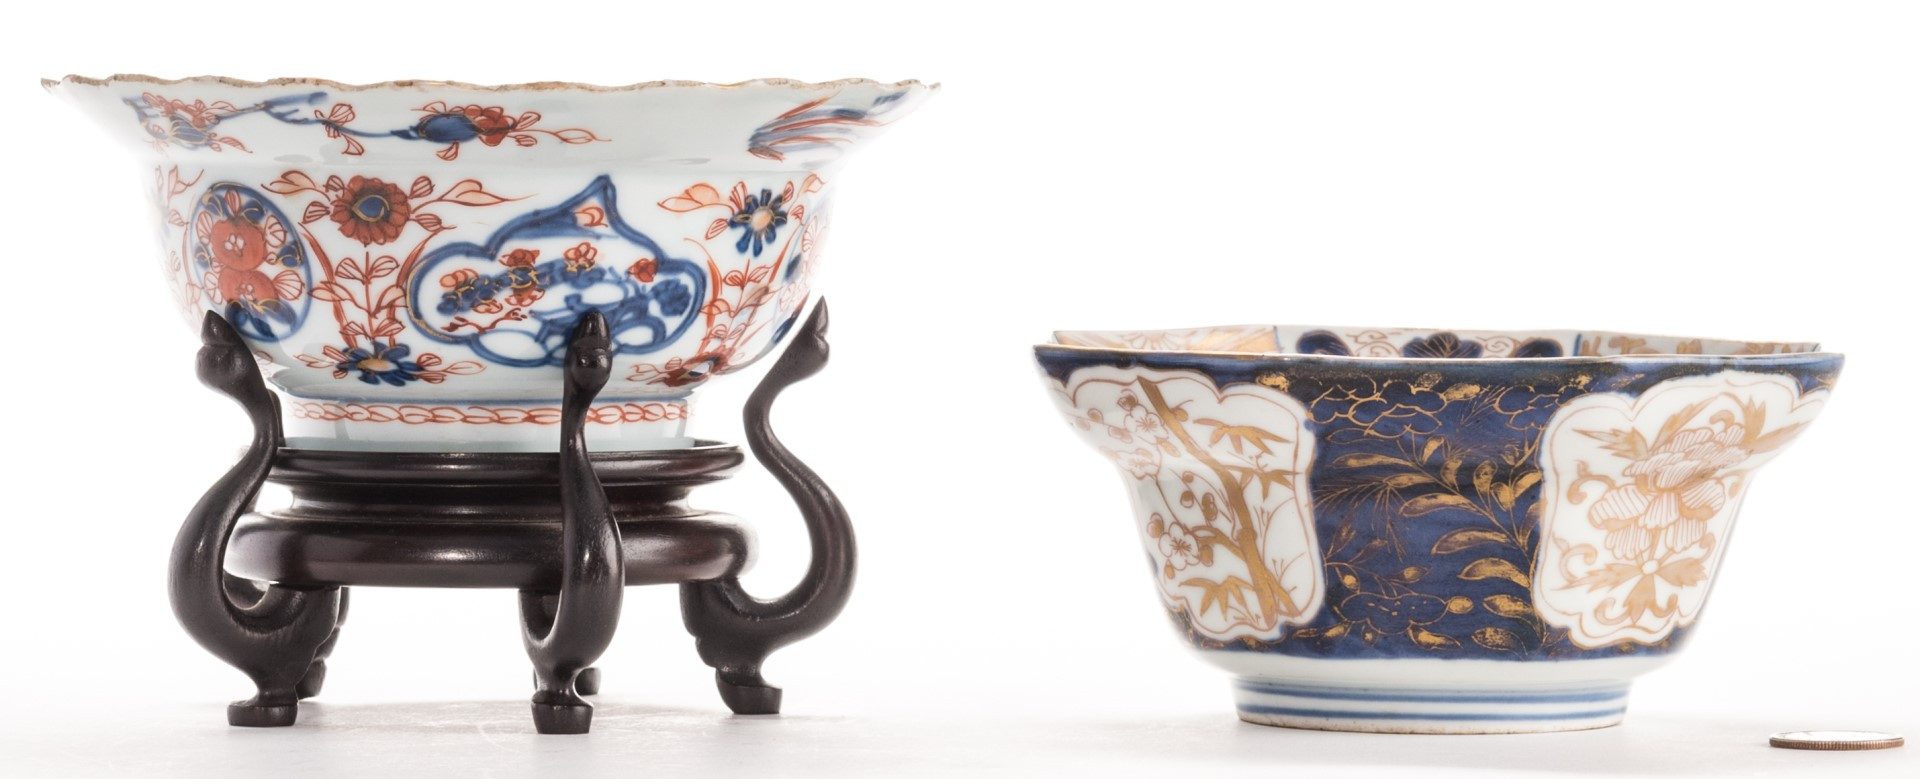 Lot 183: Two Small Asian Porcelain Bowls, 18th c.